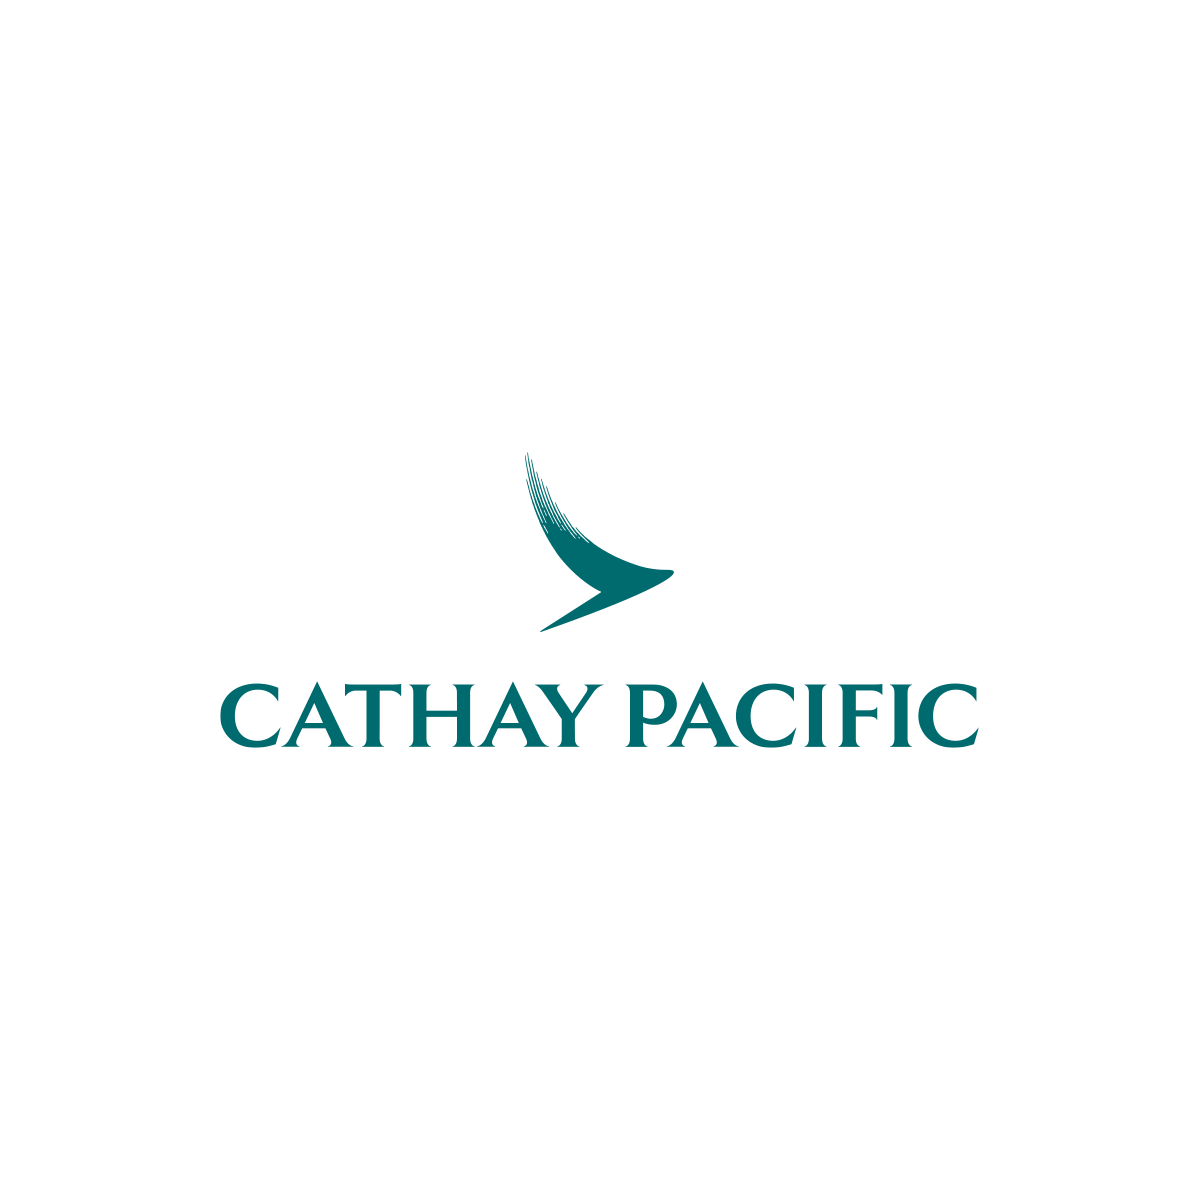 Shipit.to trackers approved for use on Cathay Pacific flights!